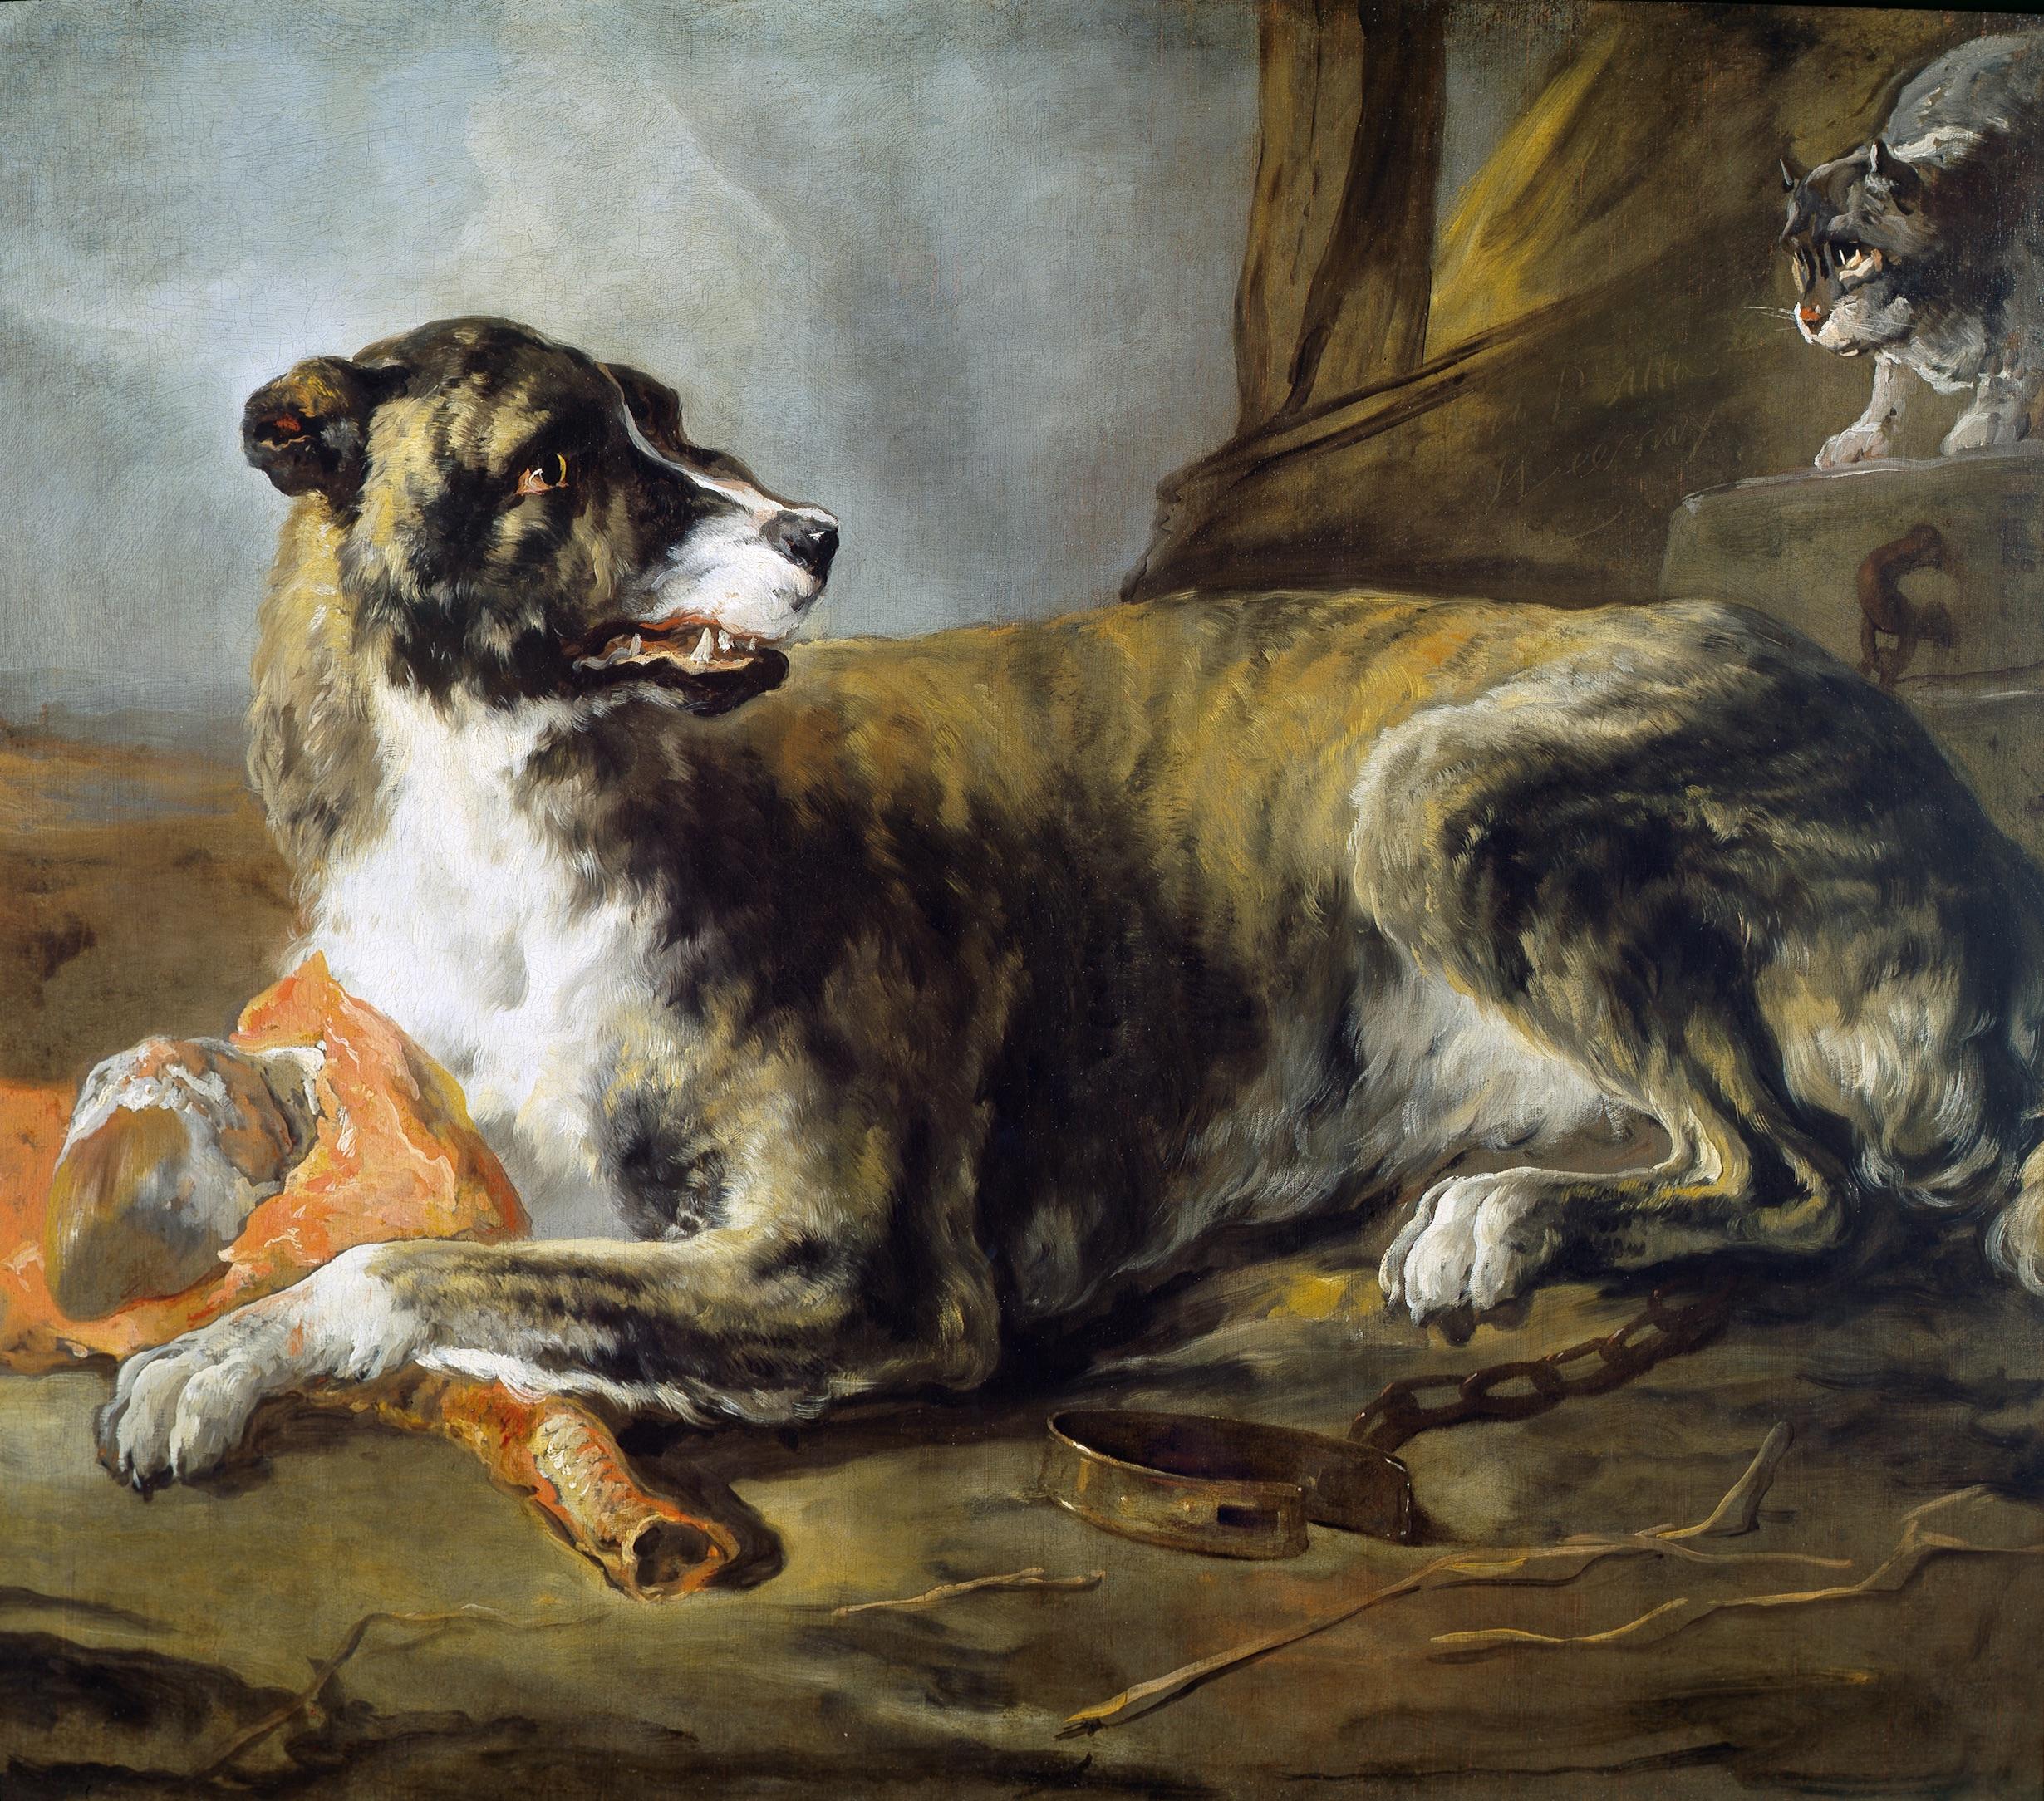 A Boar Hound with a Joint of Meat Near an Enraged Cat  - Painting by Jan Baptist Weenix